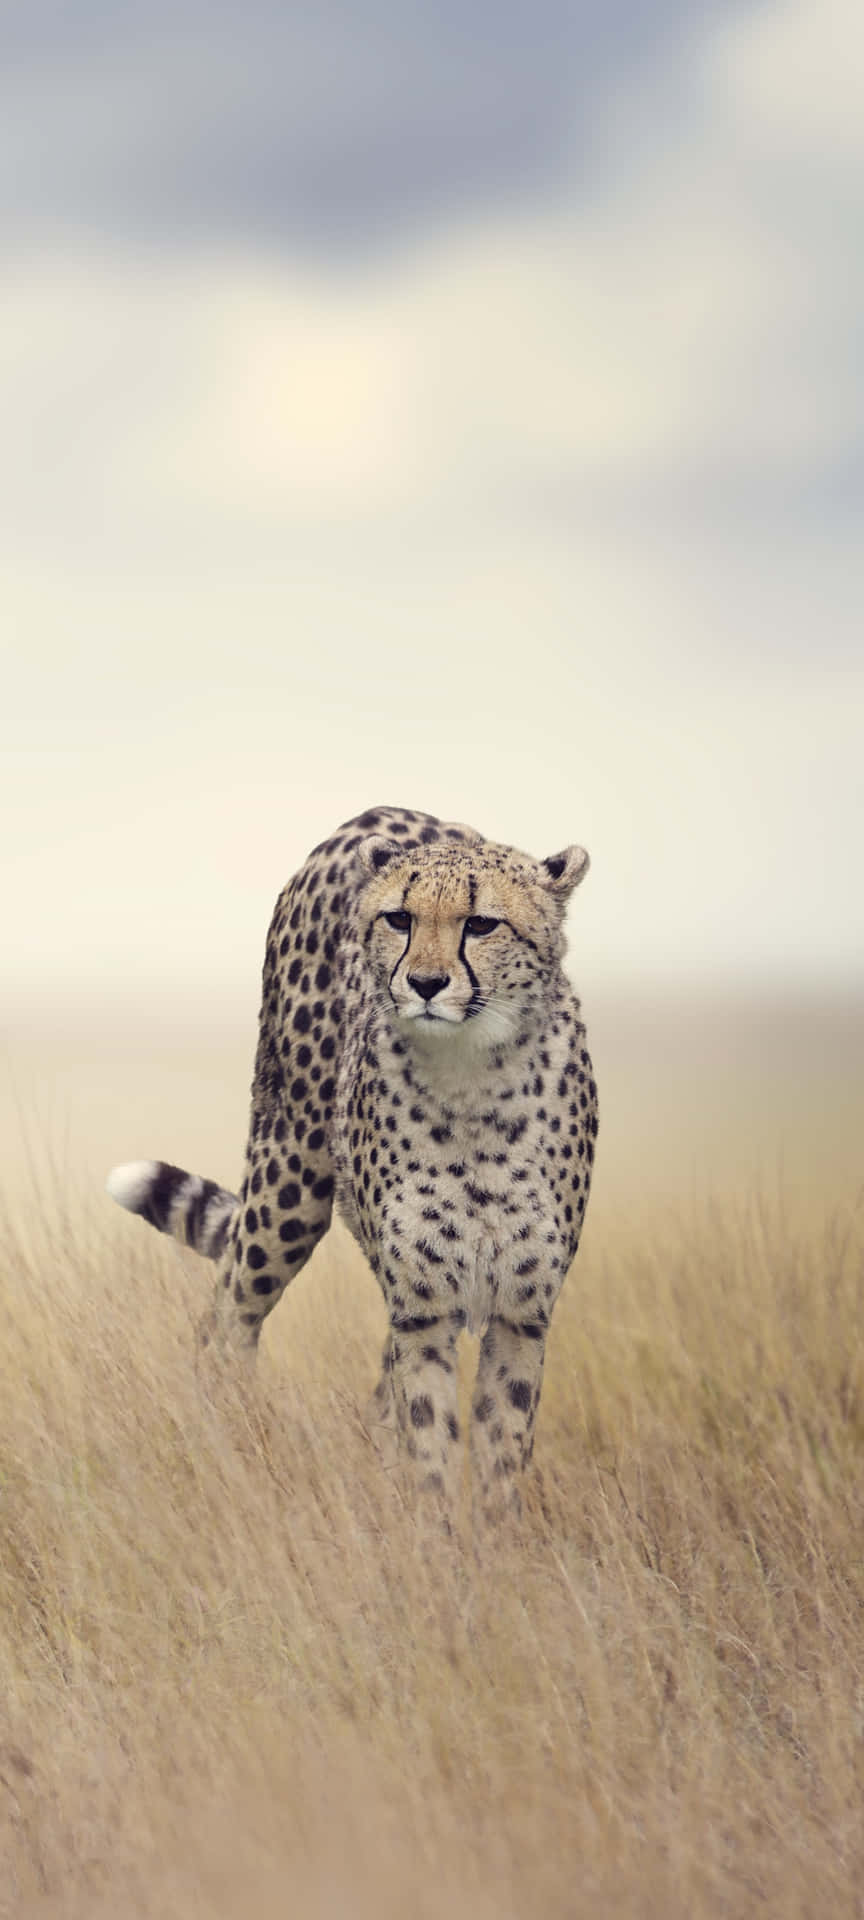 "The Majestic Cheetah - Speed Defined" Wallpaper